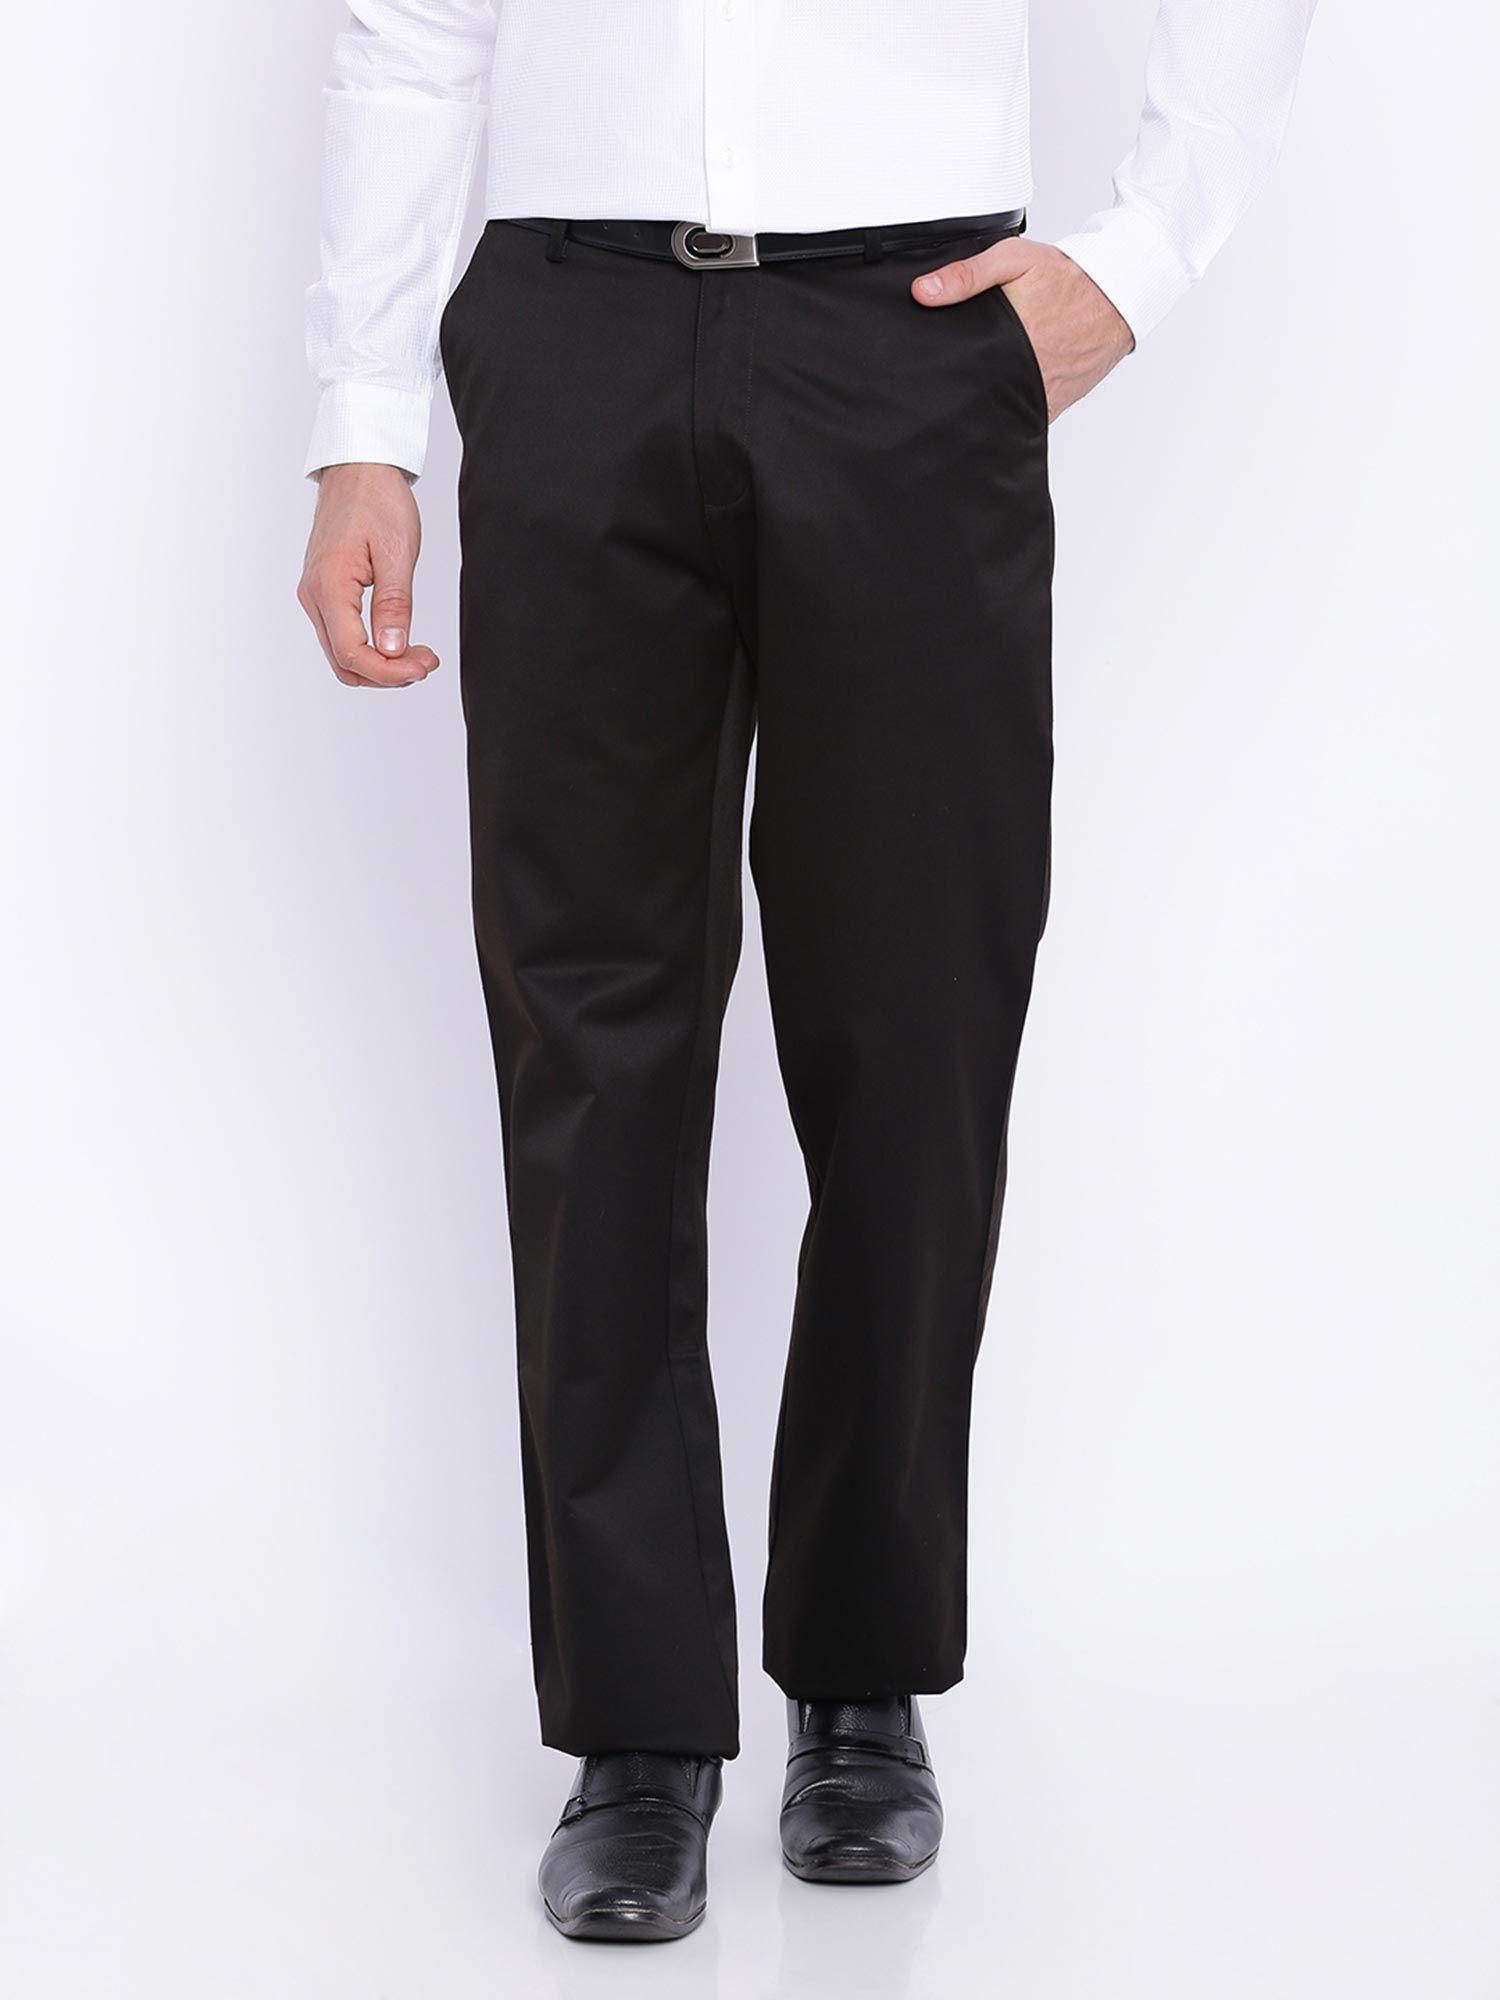 comfort fit steel grey satin weave poly cotton trousers